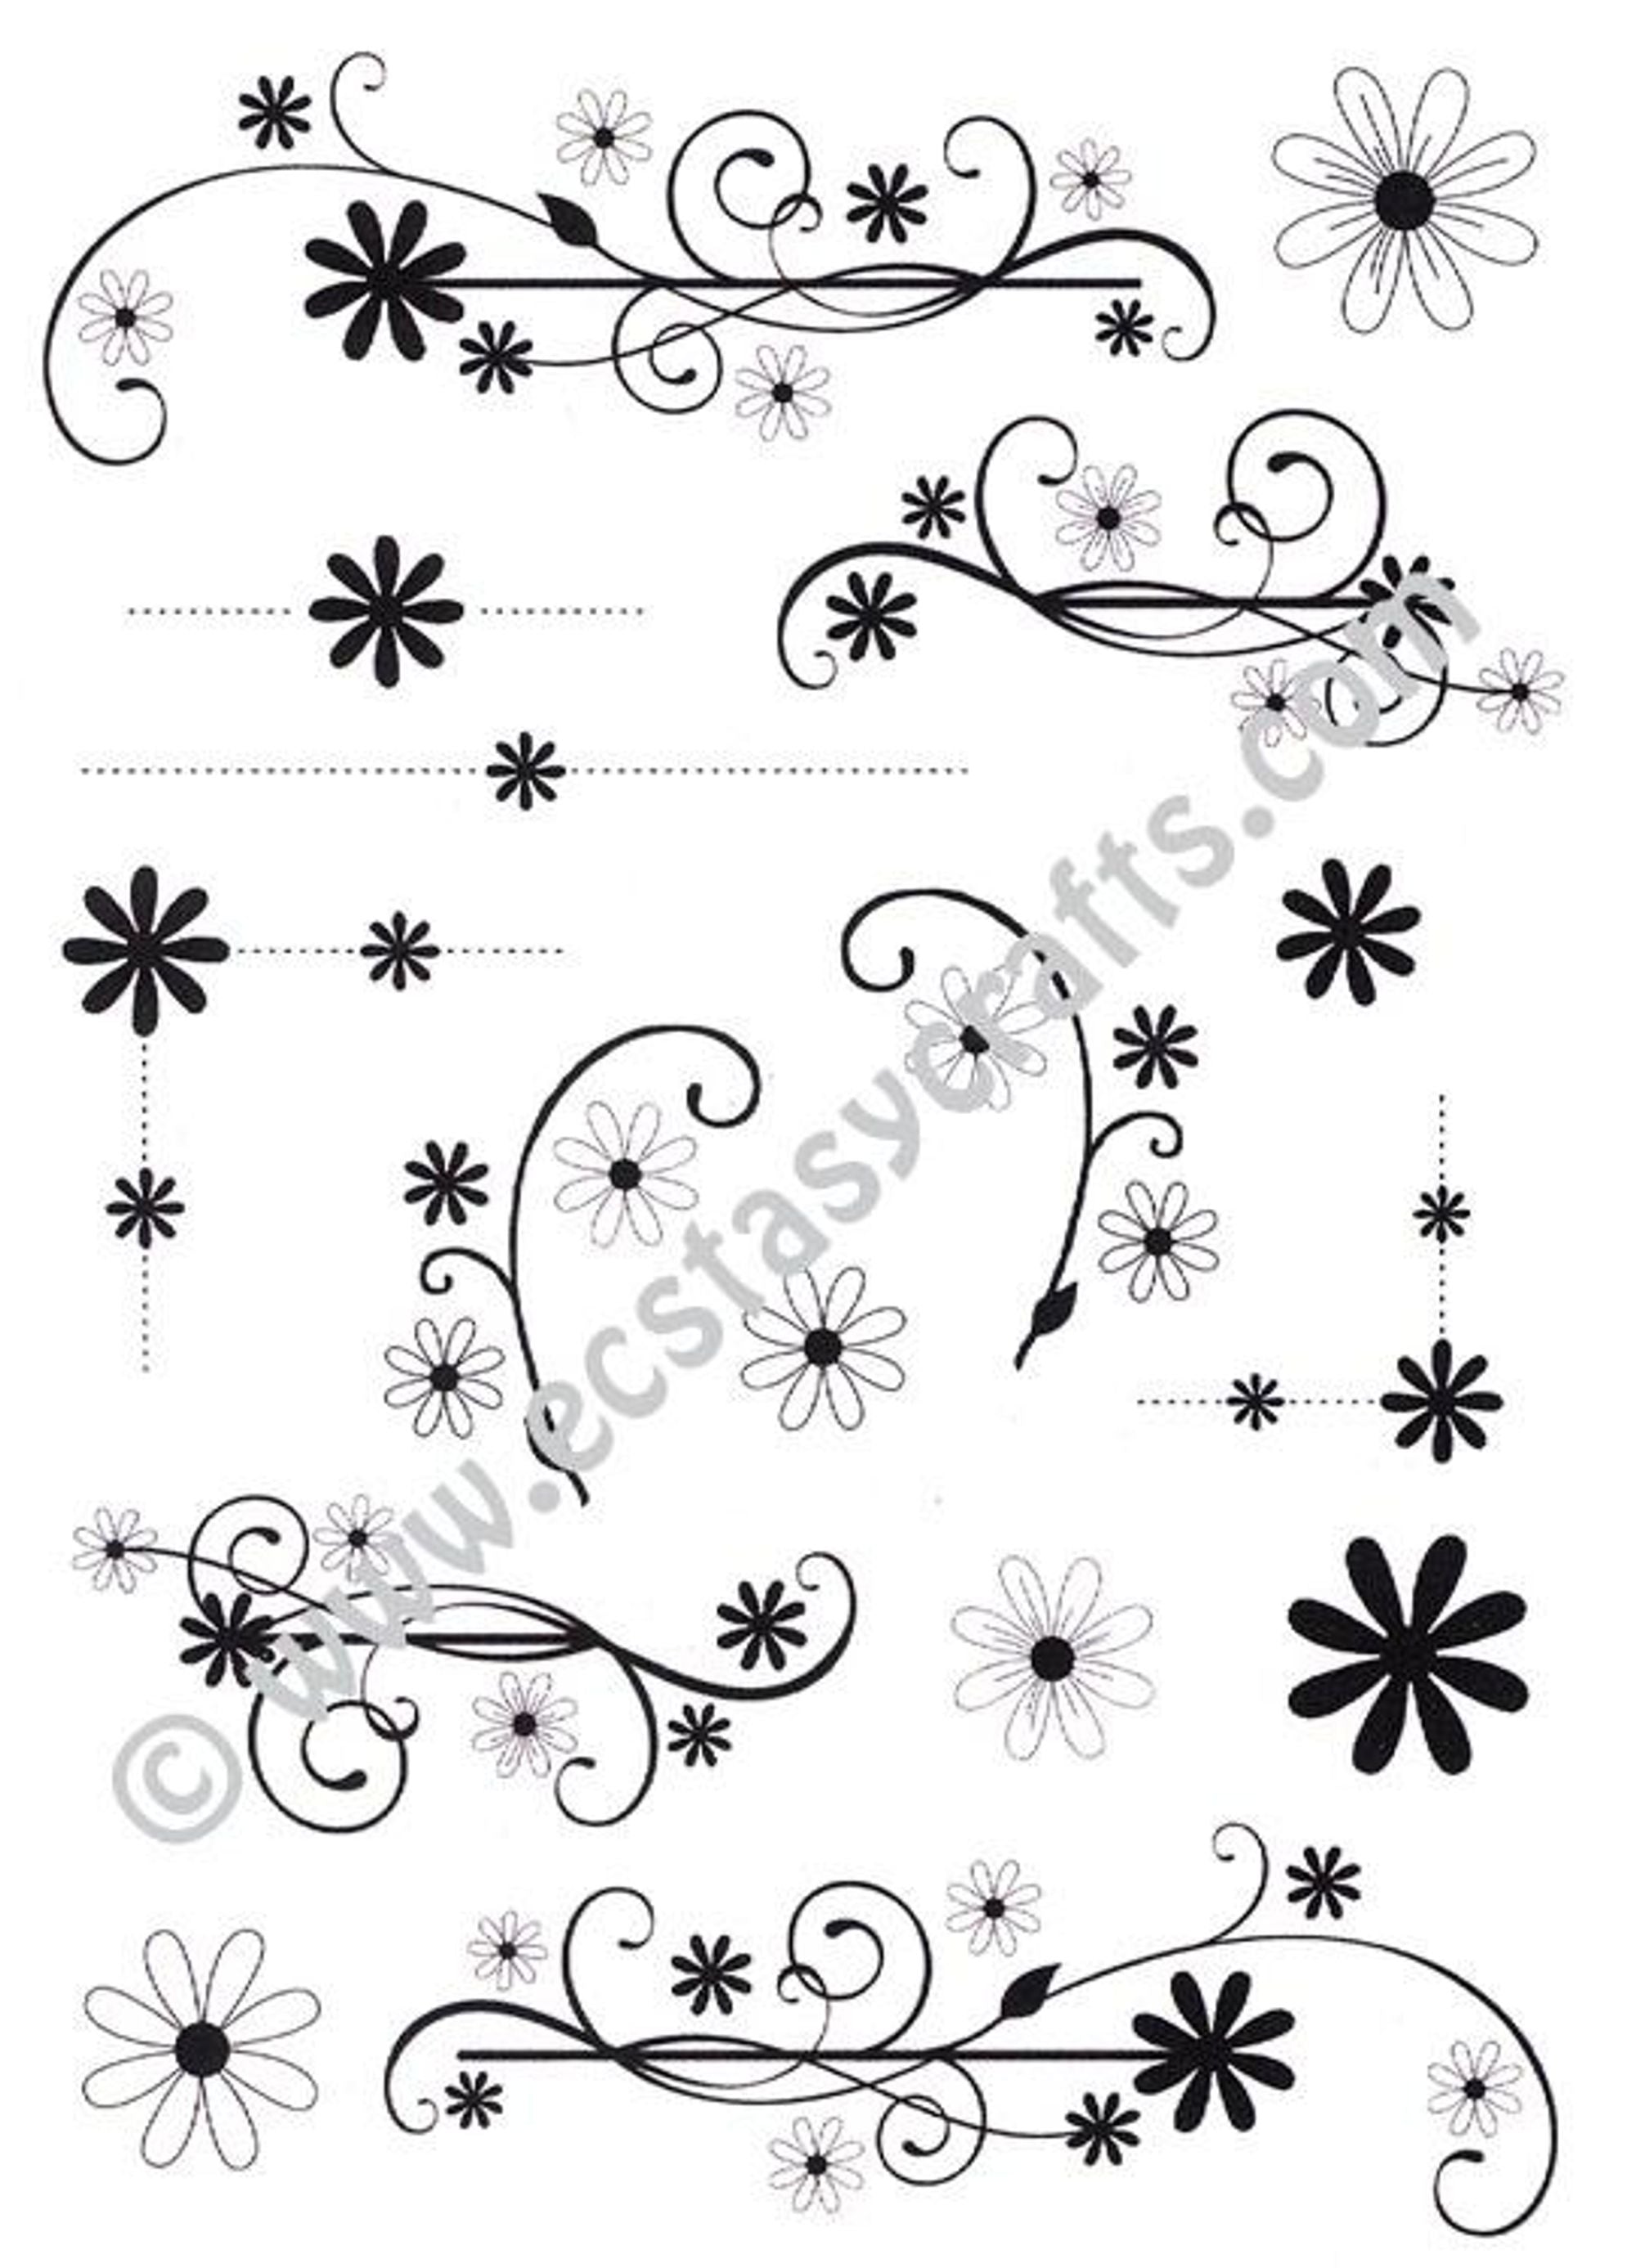 Creative Expressions: Dainty Daisies Flourishes & Corners A5 Clear